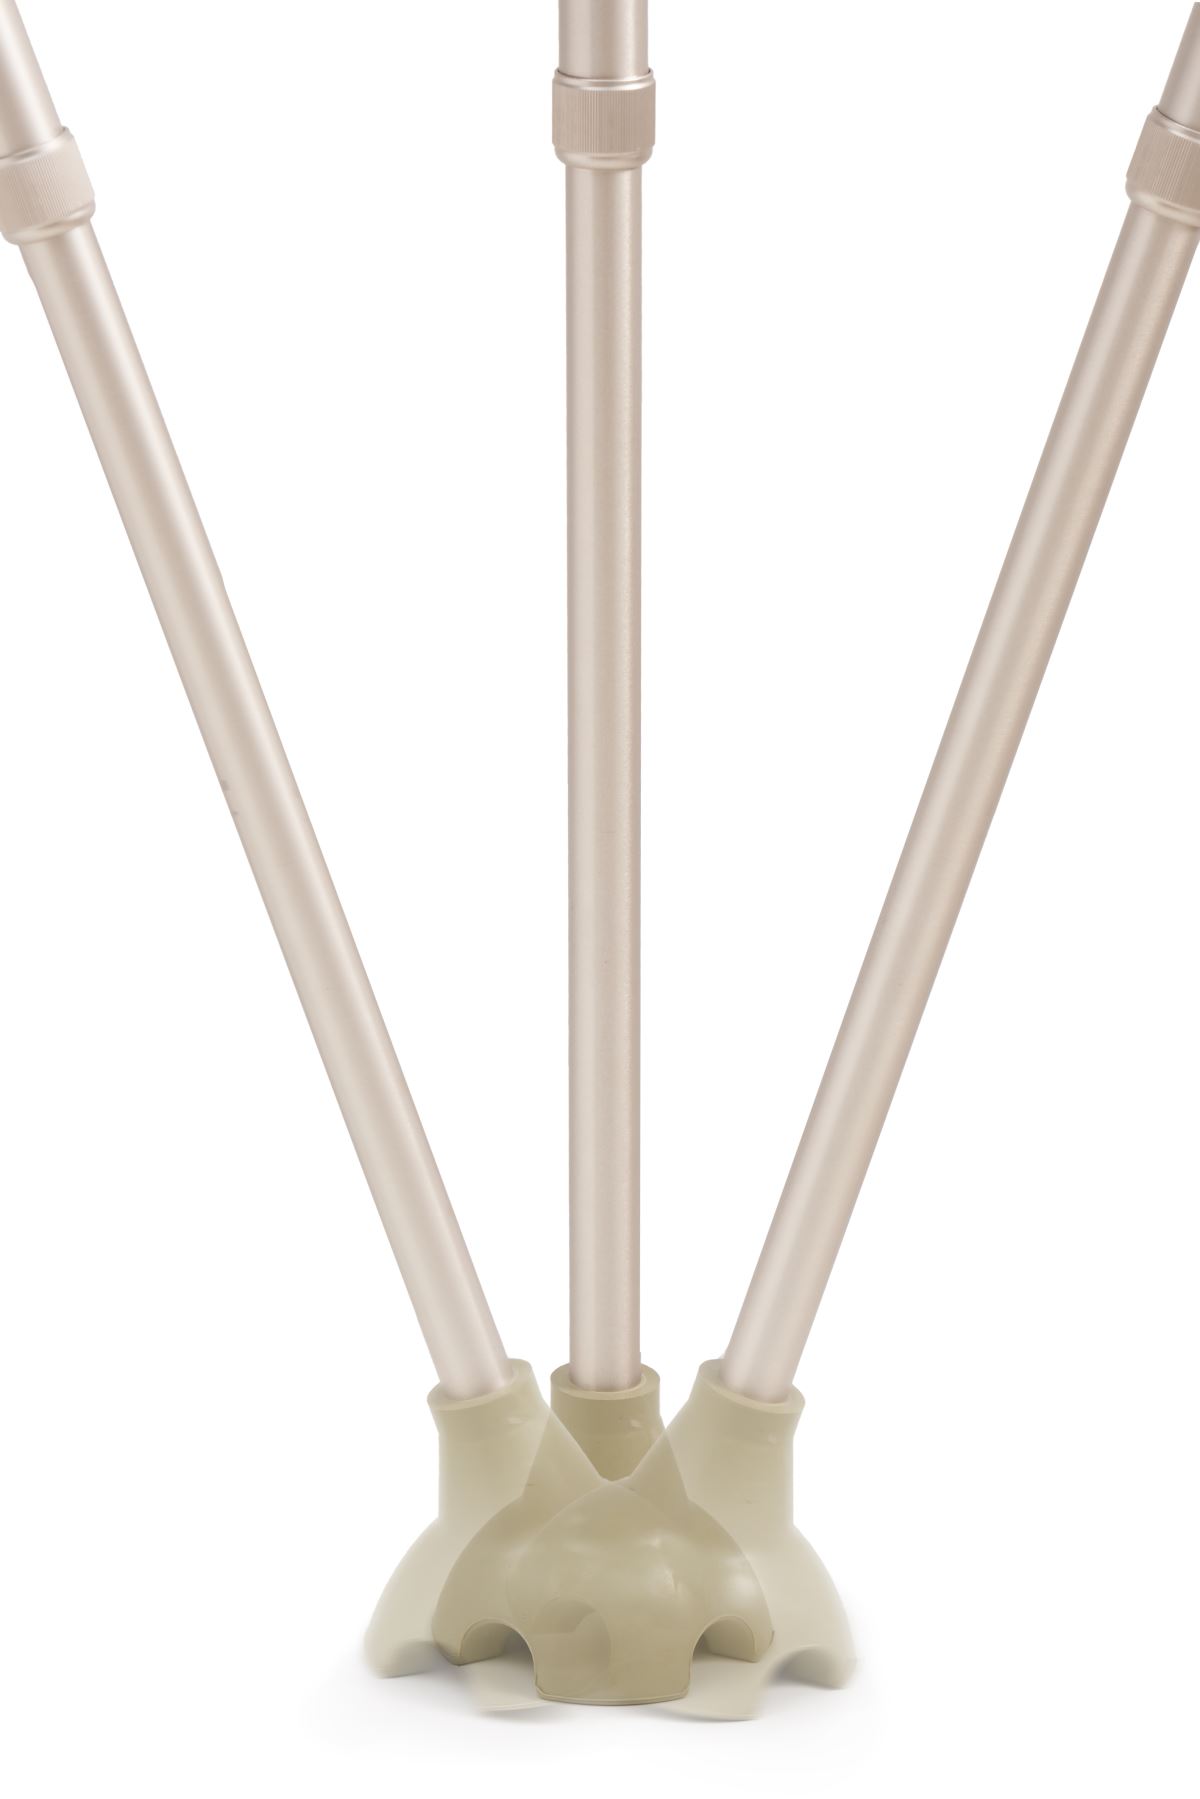 The elastic quad base makes the cane more stable and anti-skid from different angles.